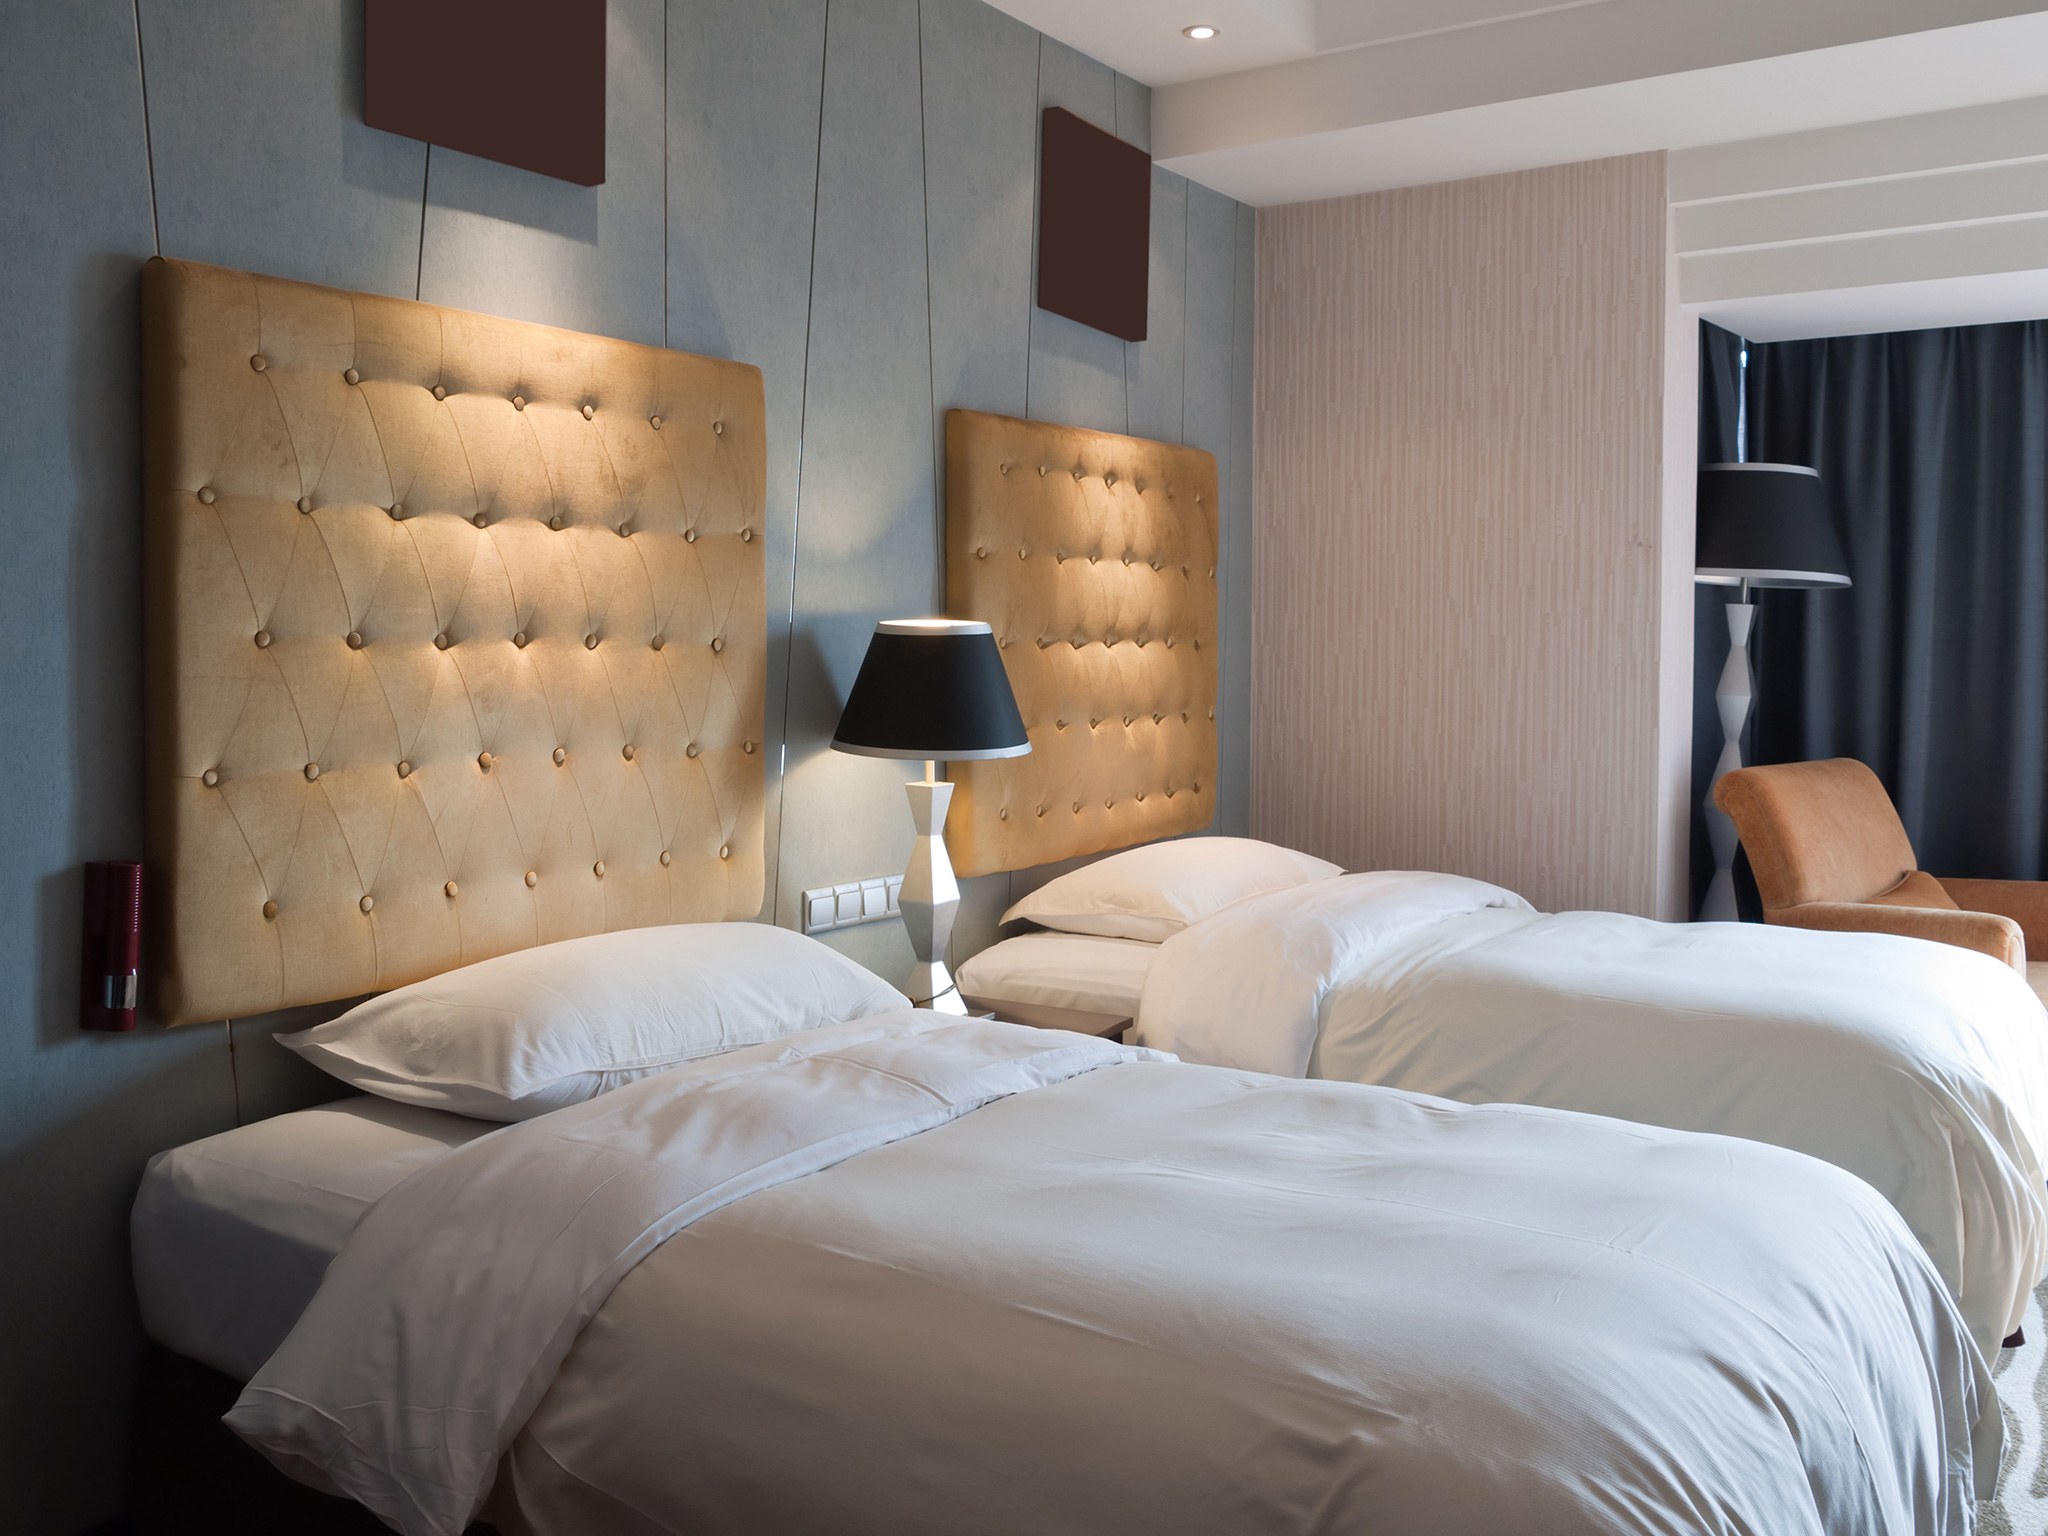 This App Offers Half-Price Hotel Rooms If You Share It With ...